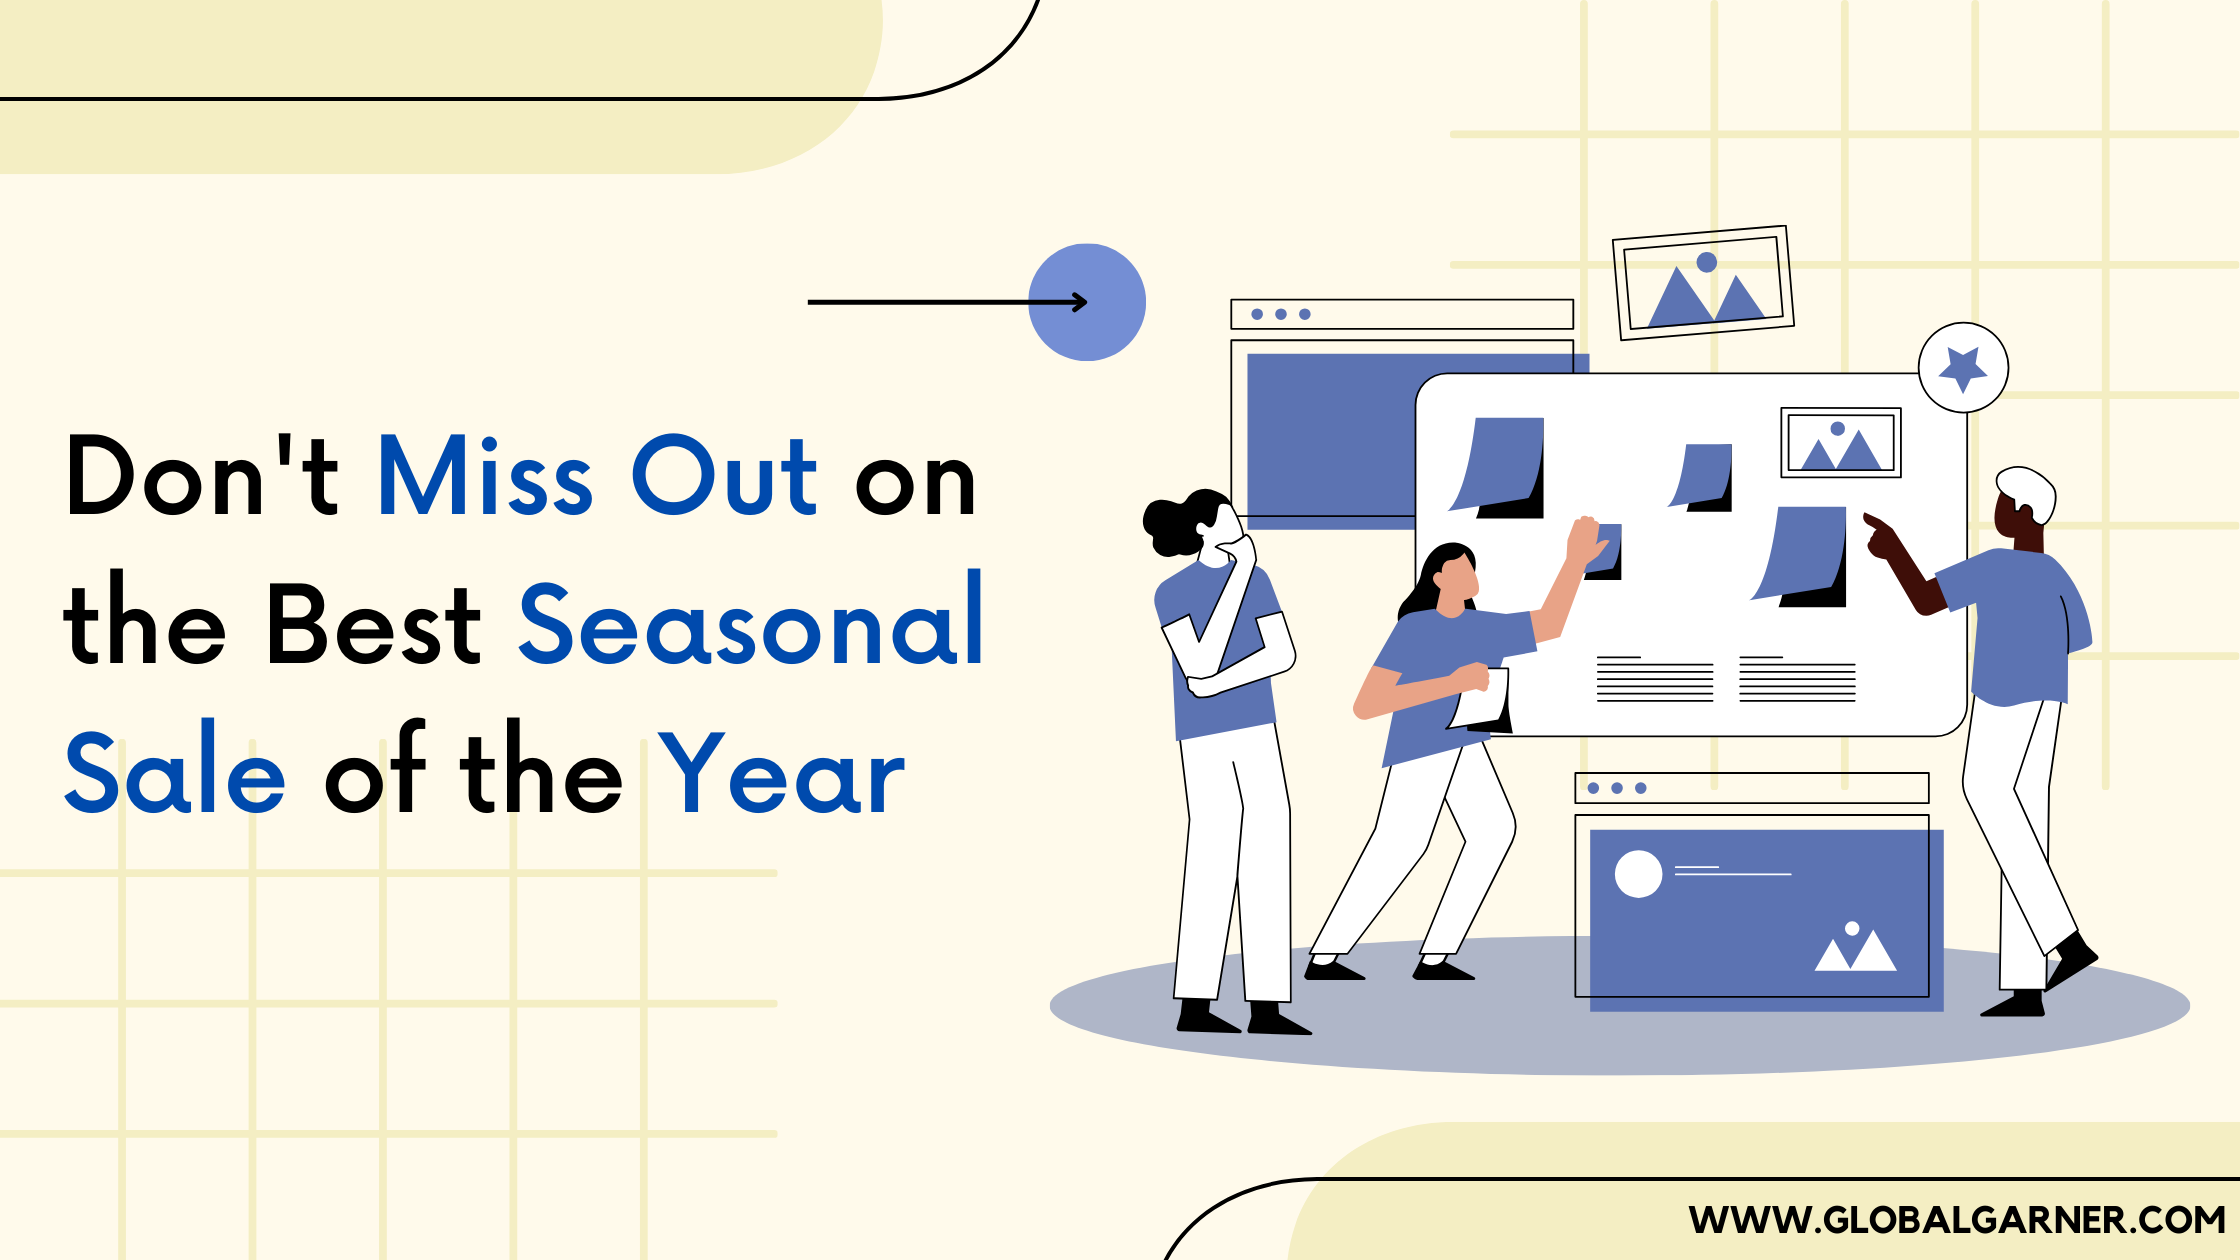 Don't miss out on the Best Seasonal Sale of the Year